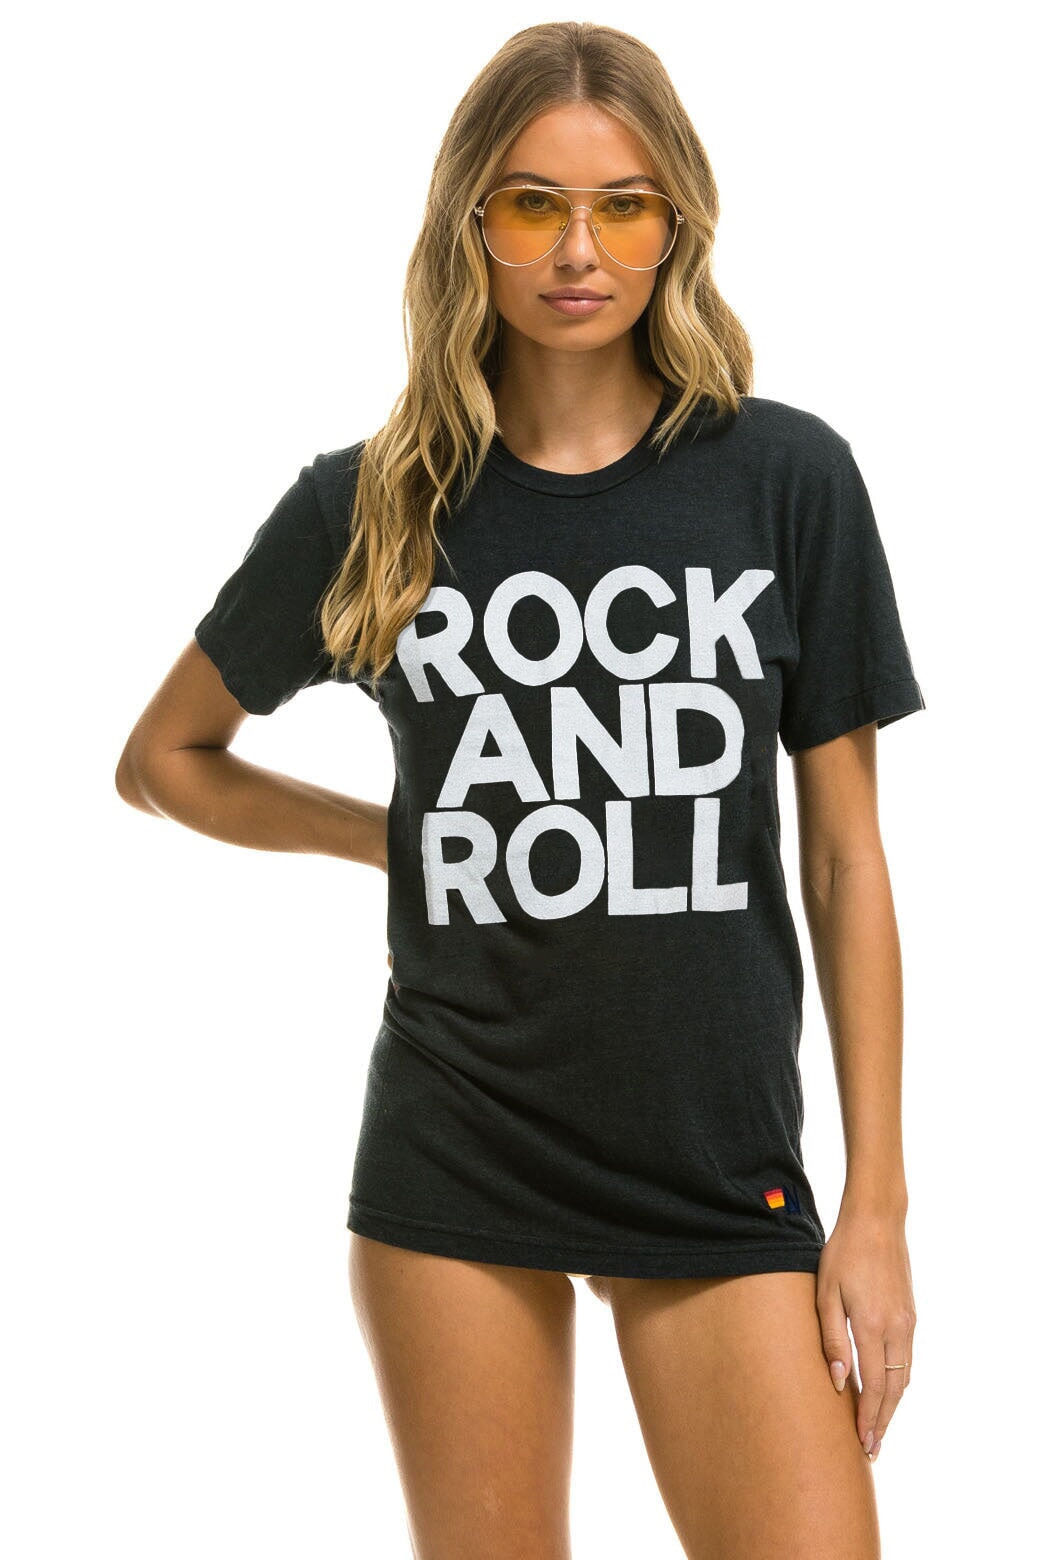 ROCK AND ROLL TEE - CHARCOAL Tees Aviator Nation 